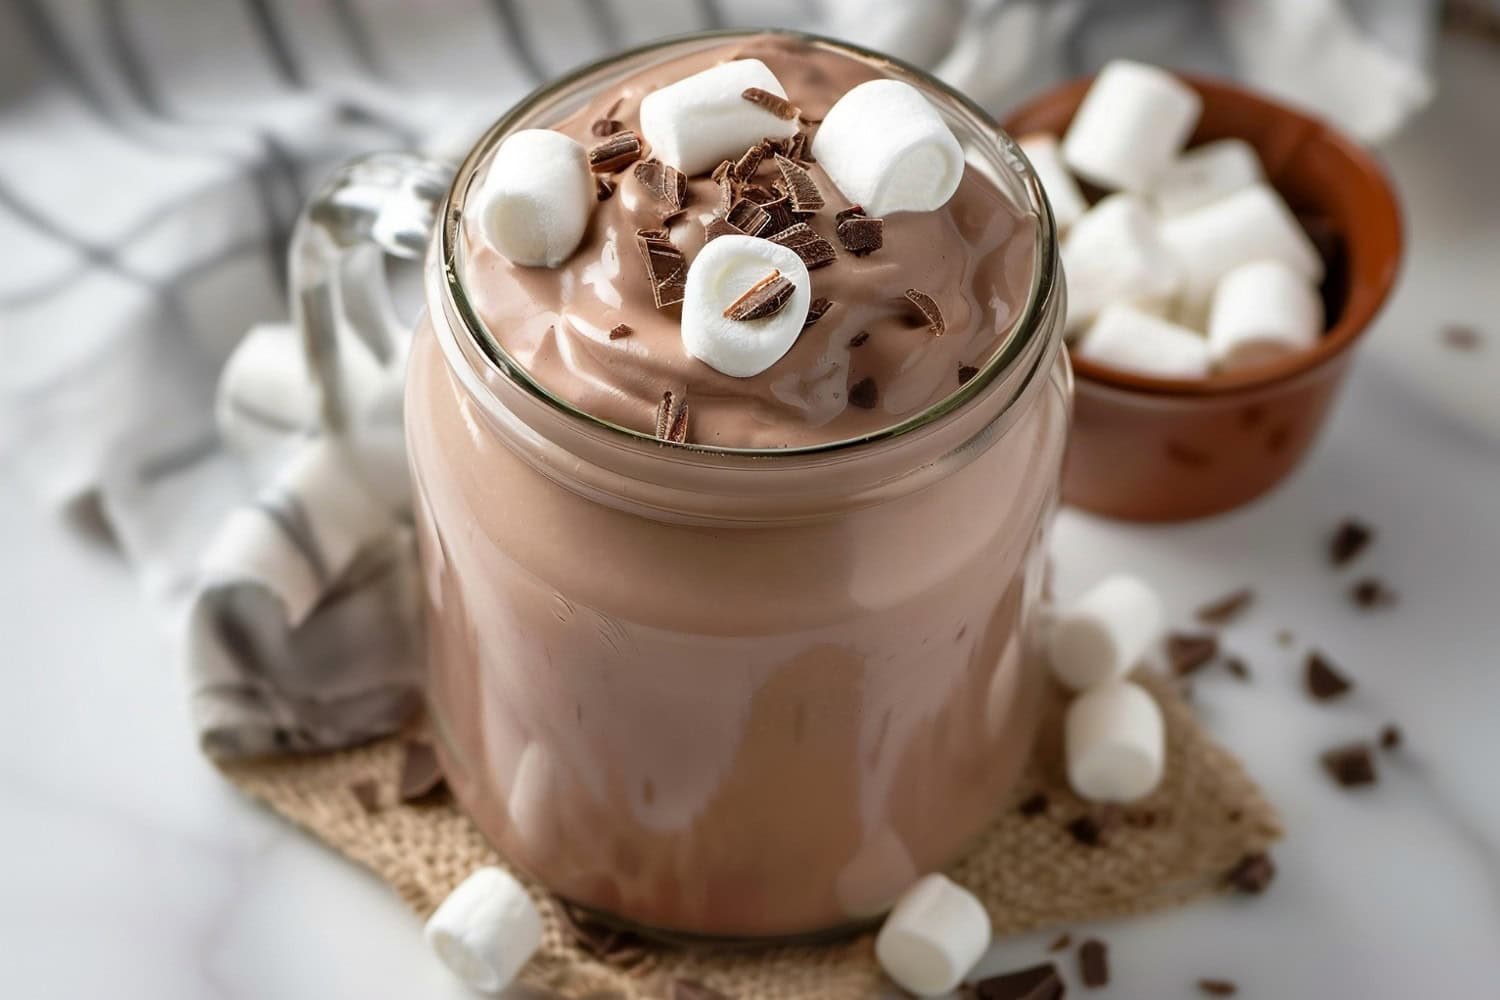 Cool and creamy whipped hot chocolate mixed with milk in a glass